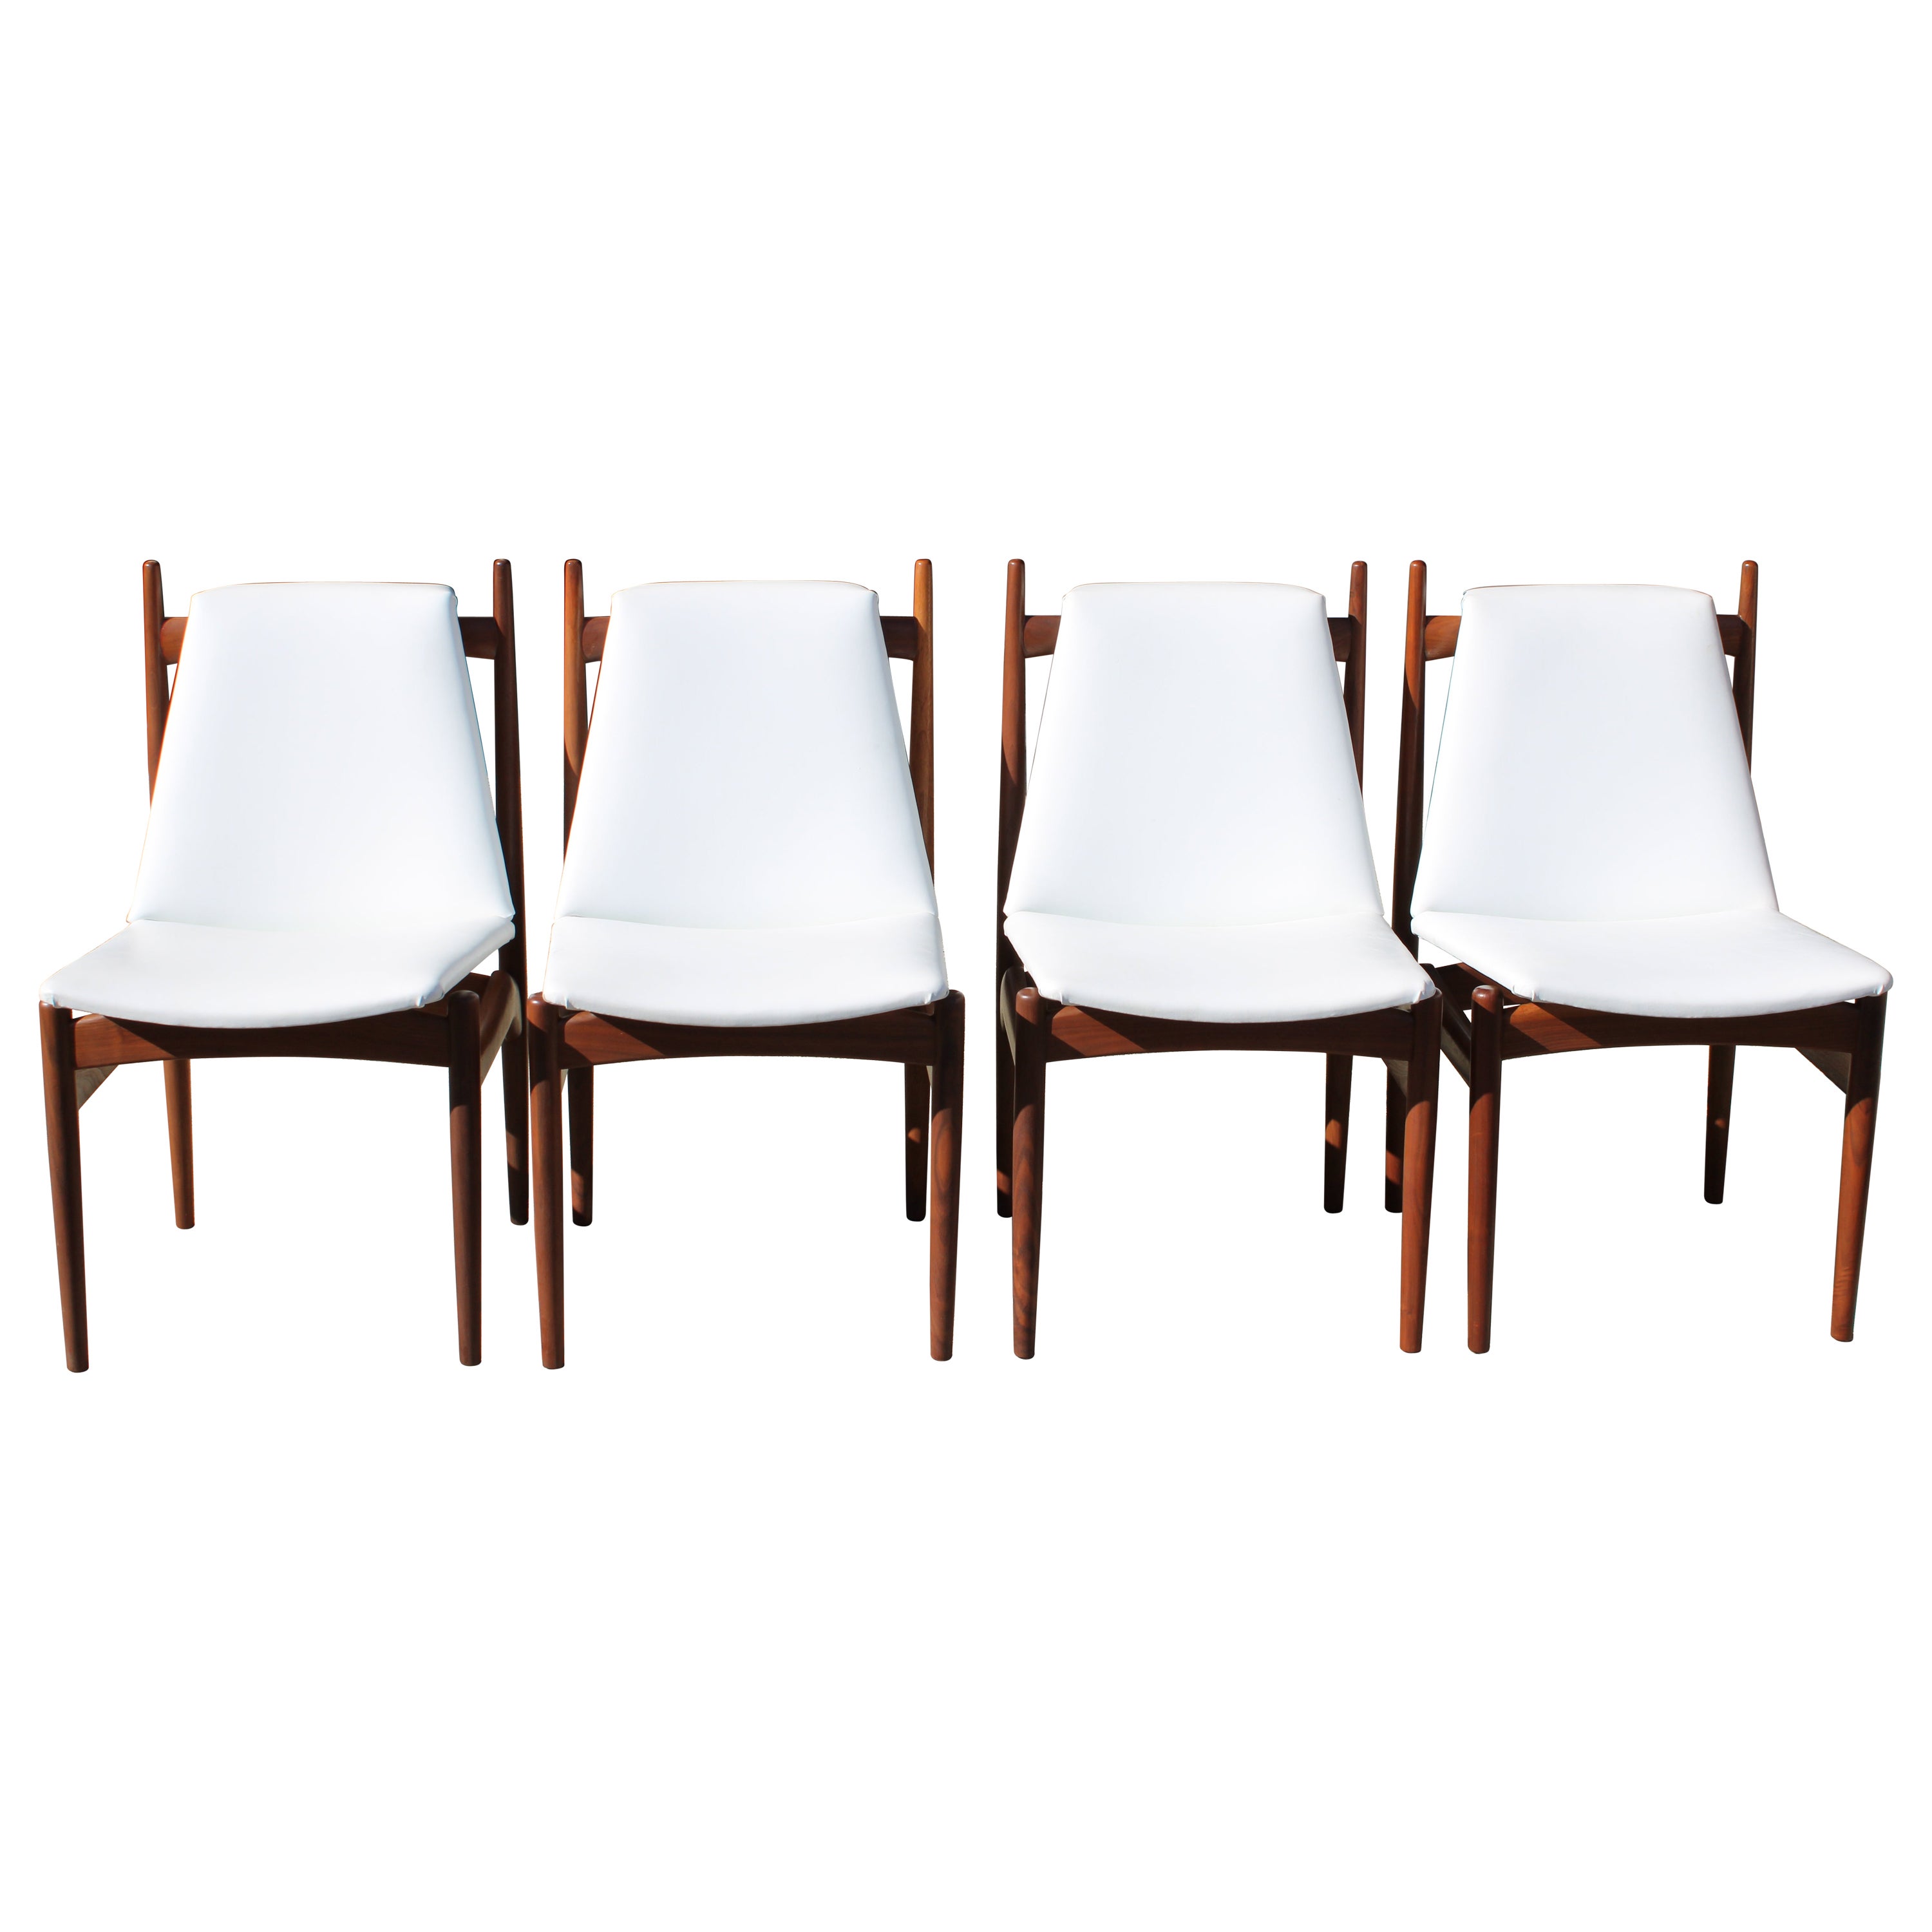 Four Dining Chairs Attributed to Greta Grossman for Glenn of California